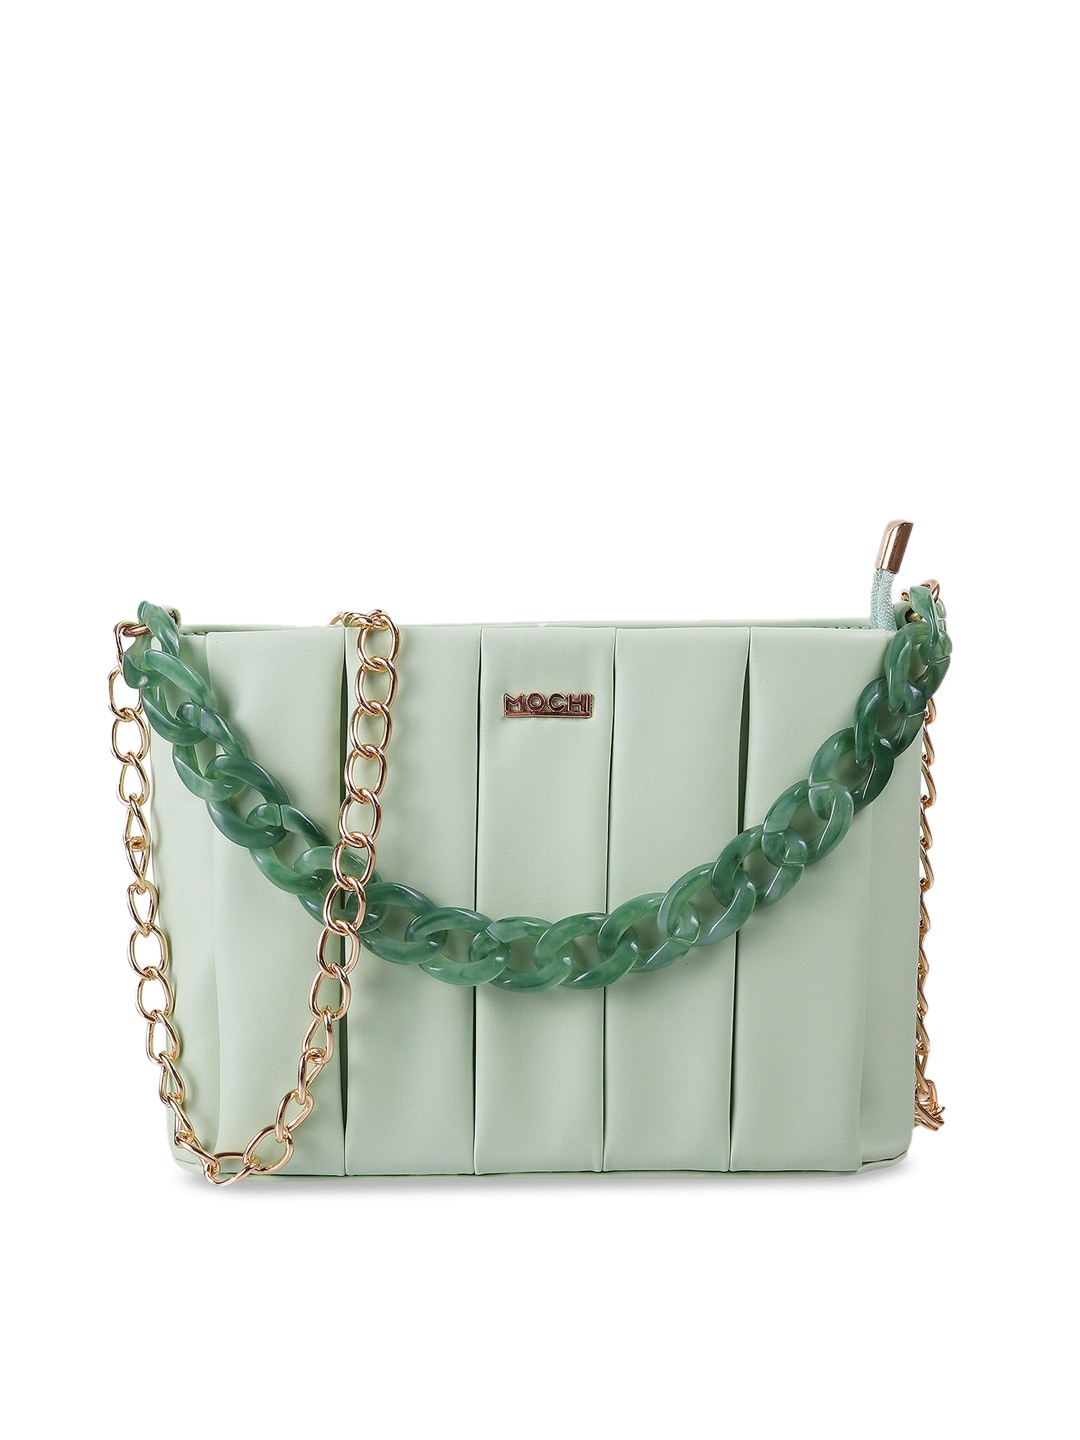 Mochi Mint Green Structured Handheld Bag Price in India